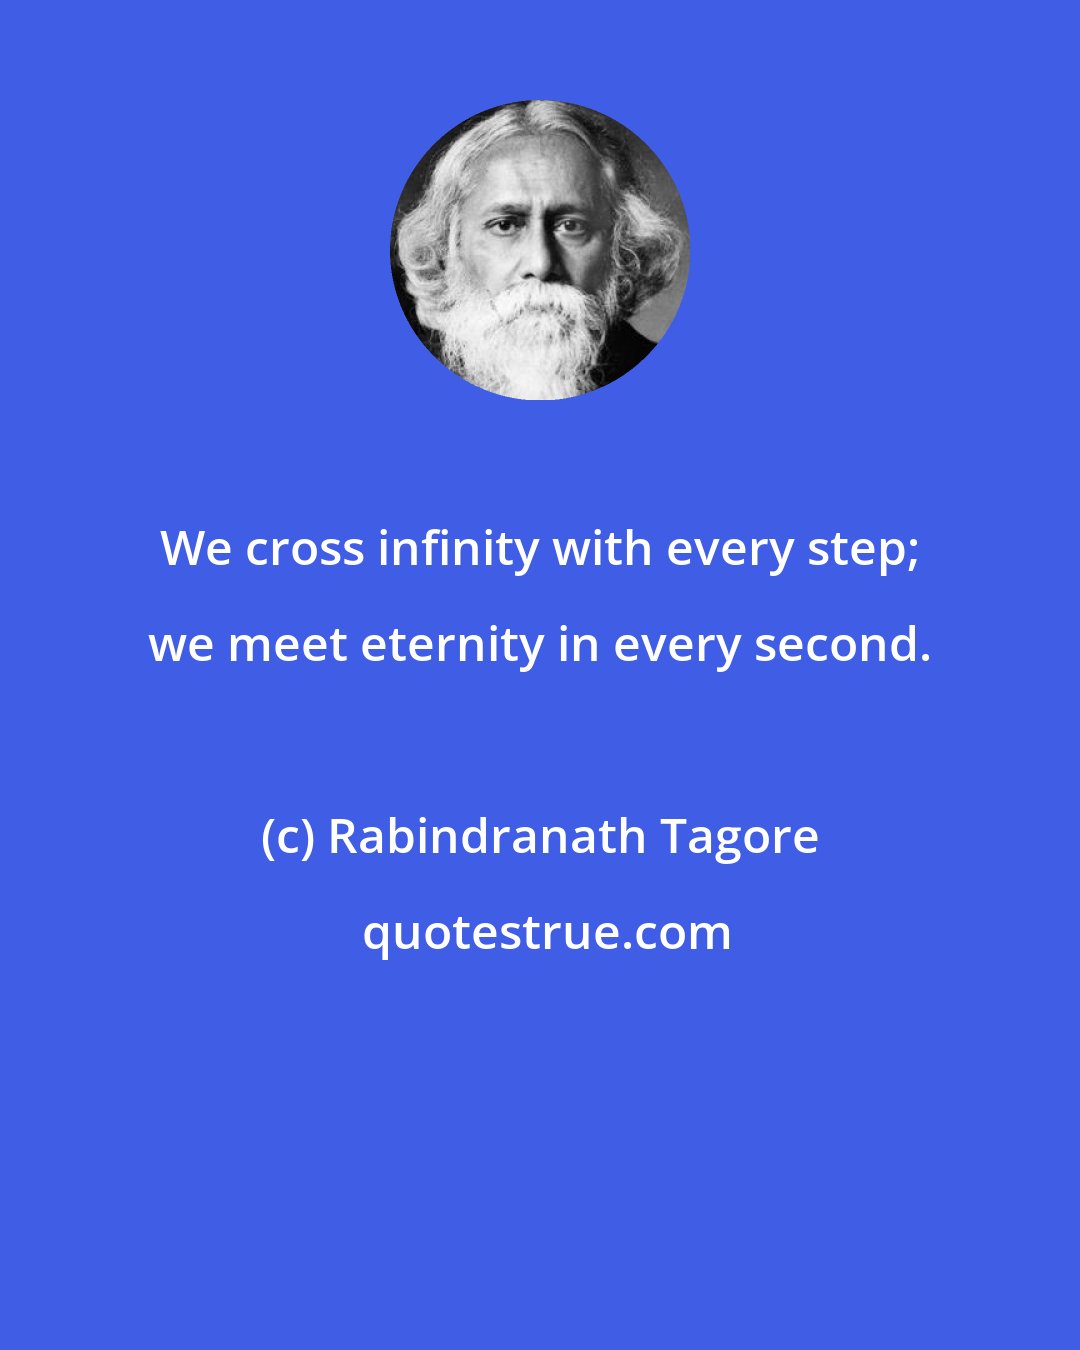 Rabindranath Tagore: We cross infinity with every step; we meet eternity in every second.